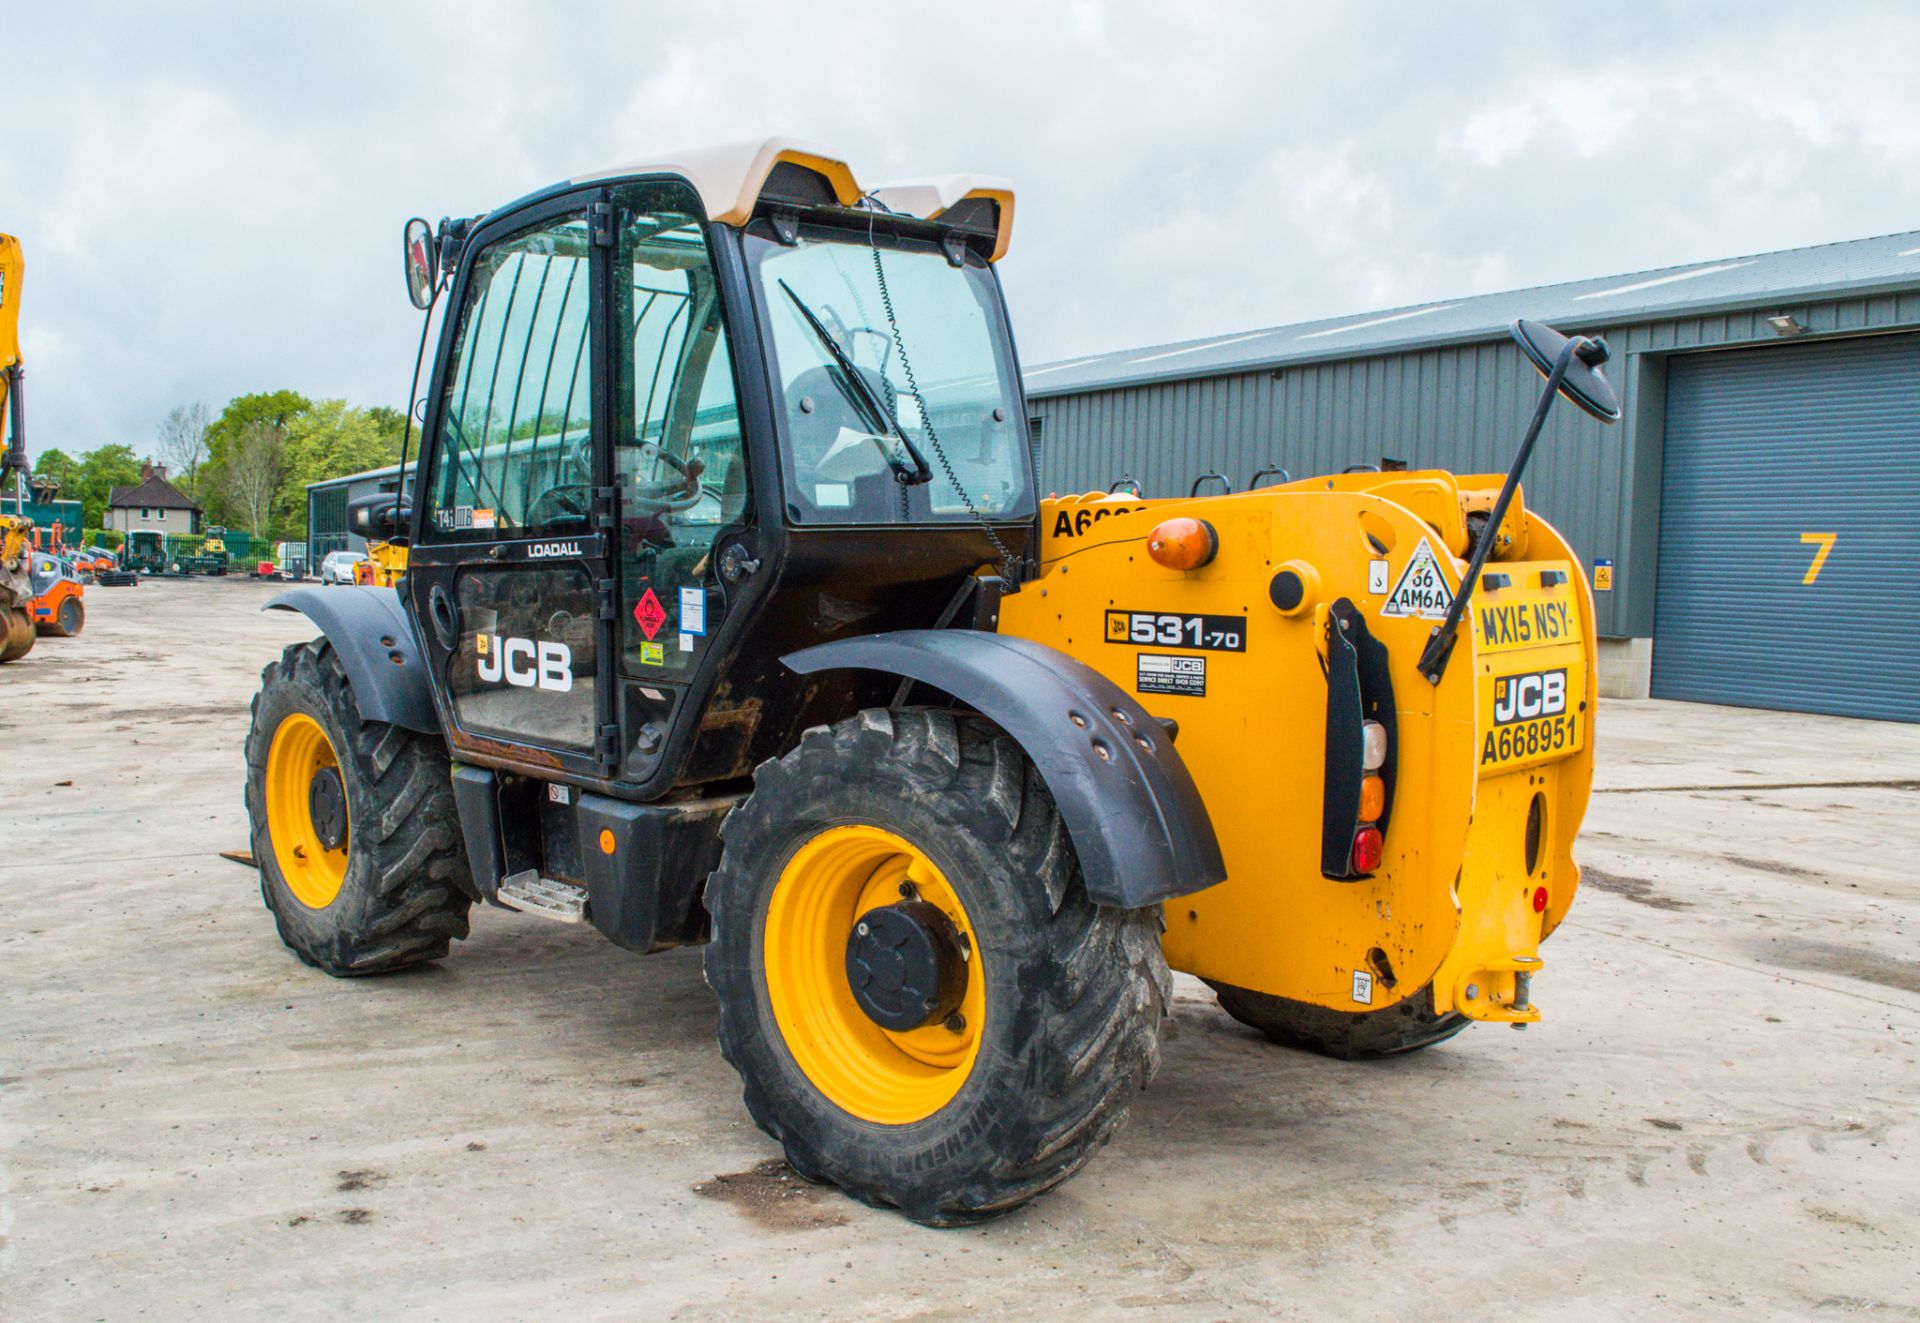 JCB 531-70 7 metre telescopic handler  Year: 2015  S/N: 2349726 Recorded Hours: 2144 A668951 - Image 4 of 25